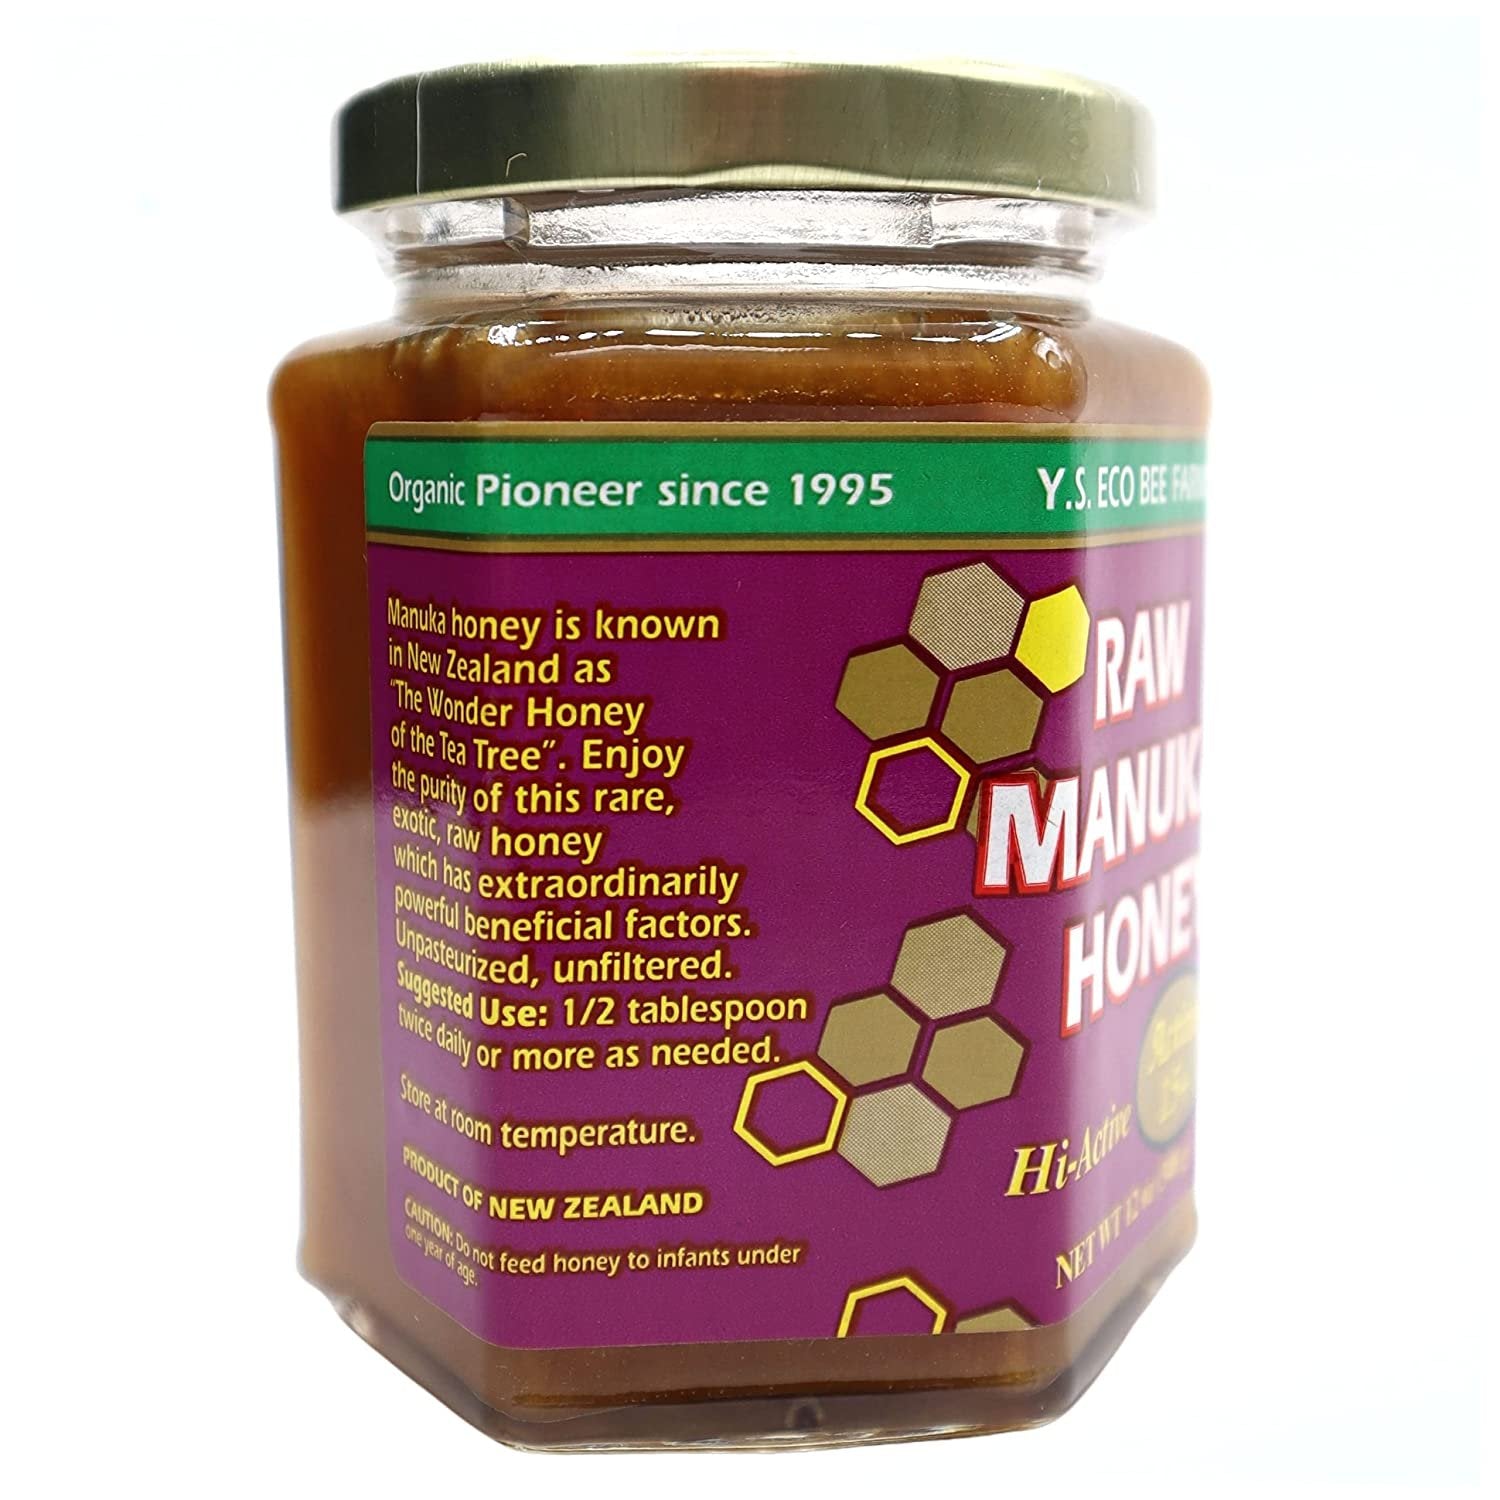 Y.S. Eco Bee Farms, 100% Certified Raw Manuka Honey, Hi-Active, Active 15plus, Unpasteurized, Unfiltered, Rare, Exotic, Raw, Kosher, Gluten Free, "The Wonder Honey Of The Tea Tree", 12 Oz -2 Jars